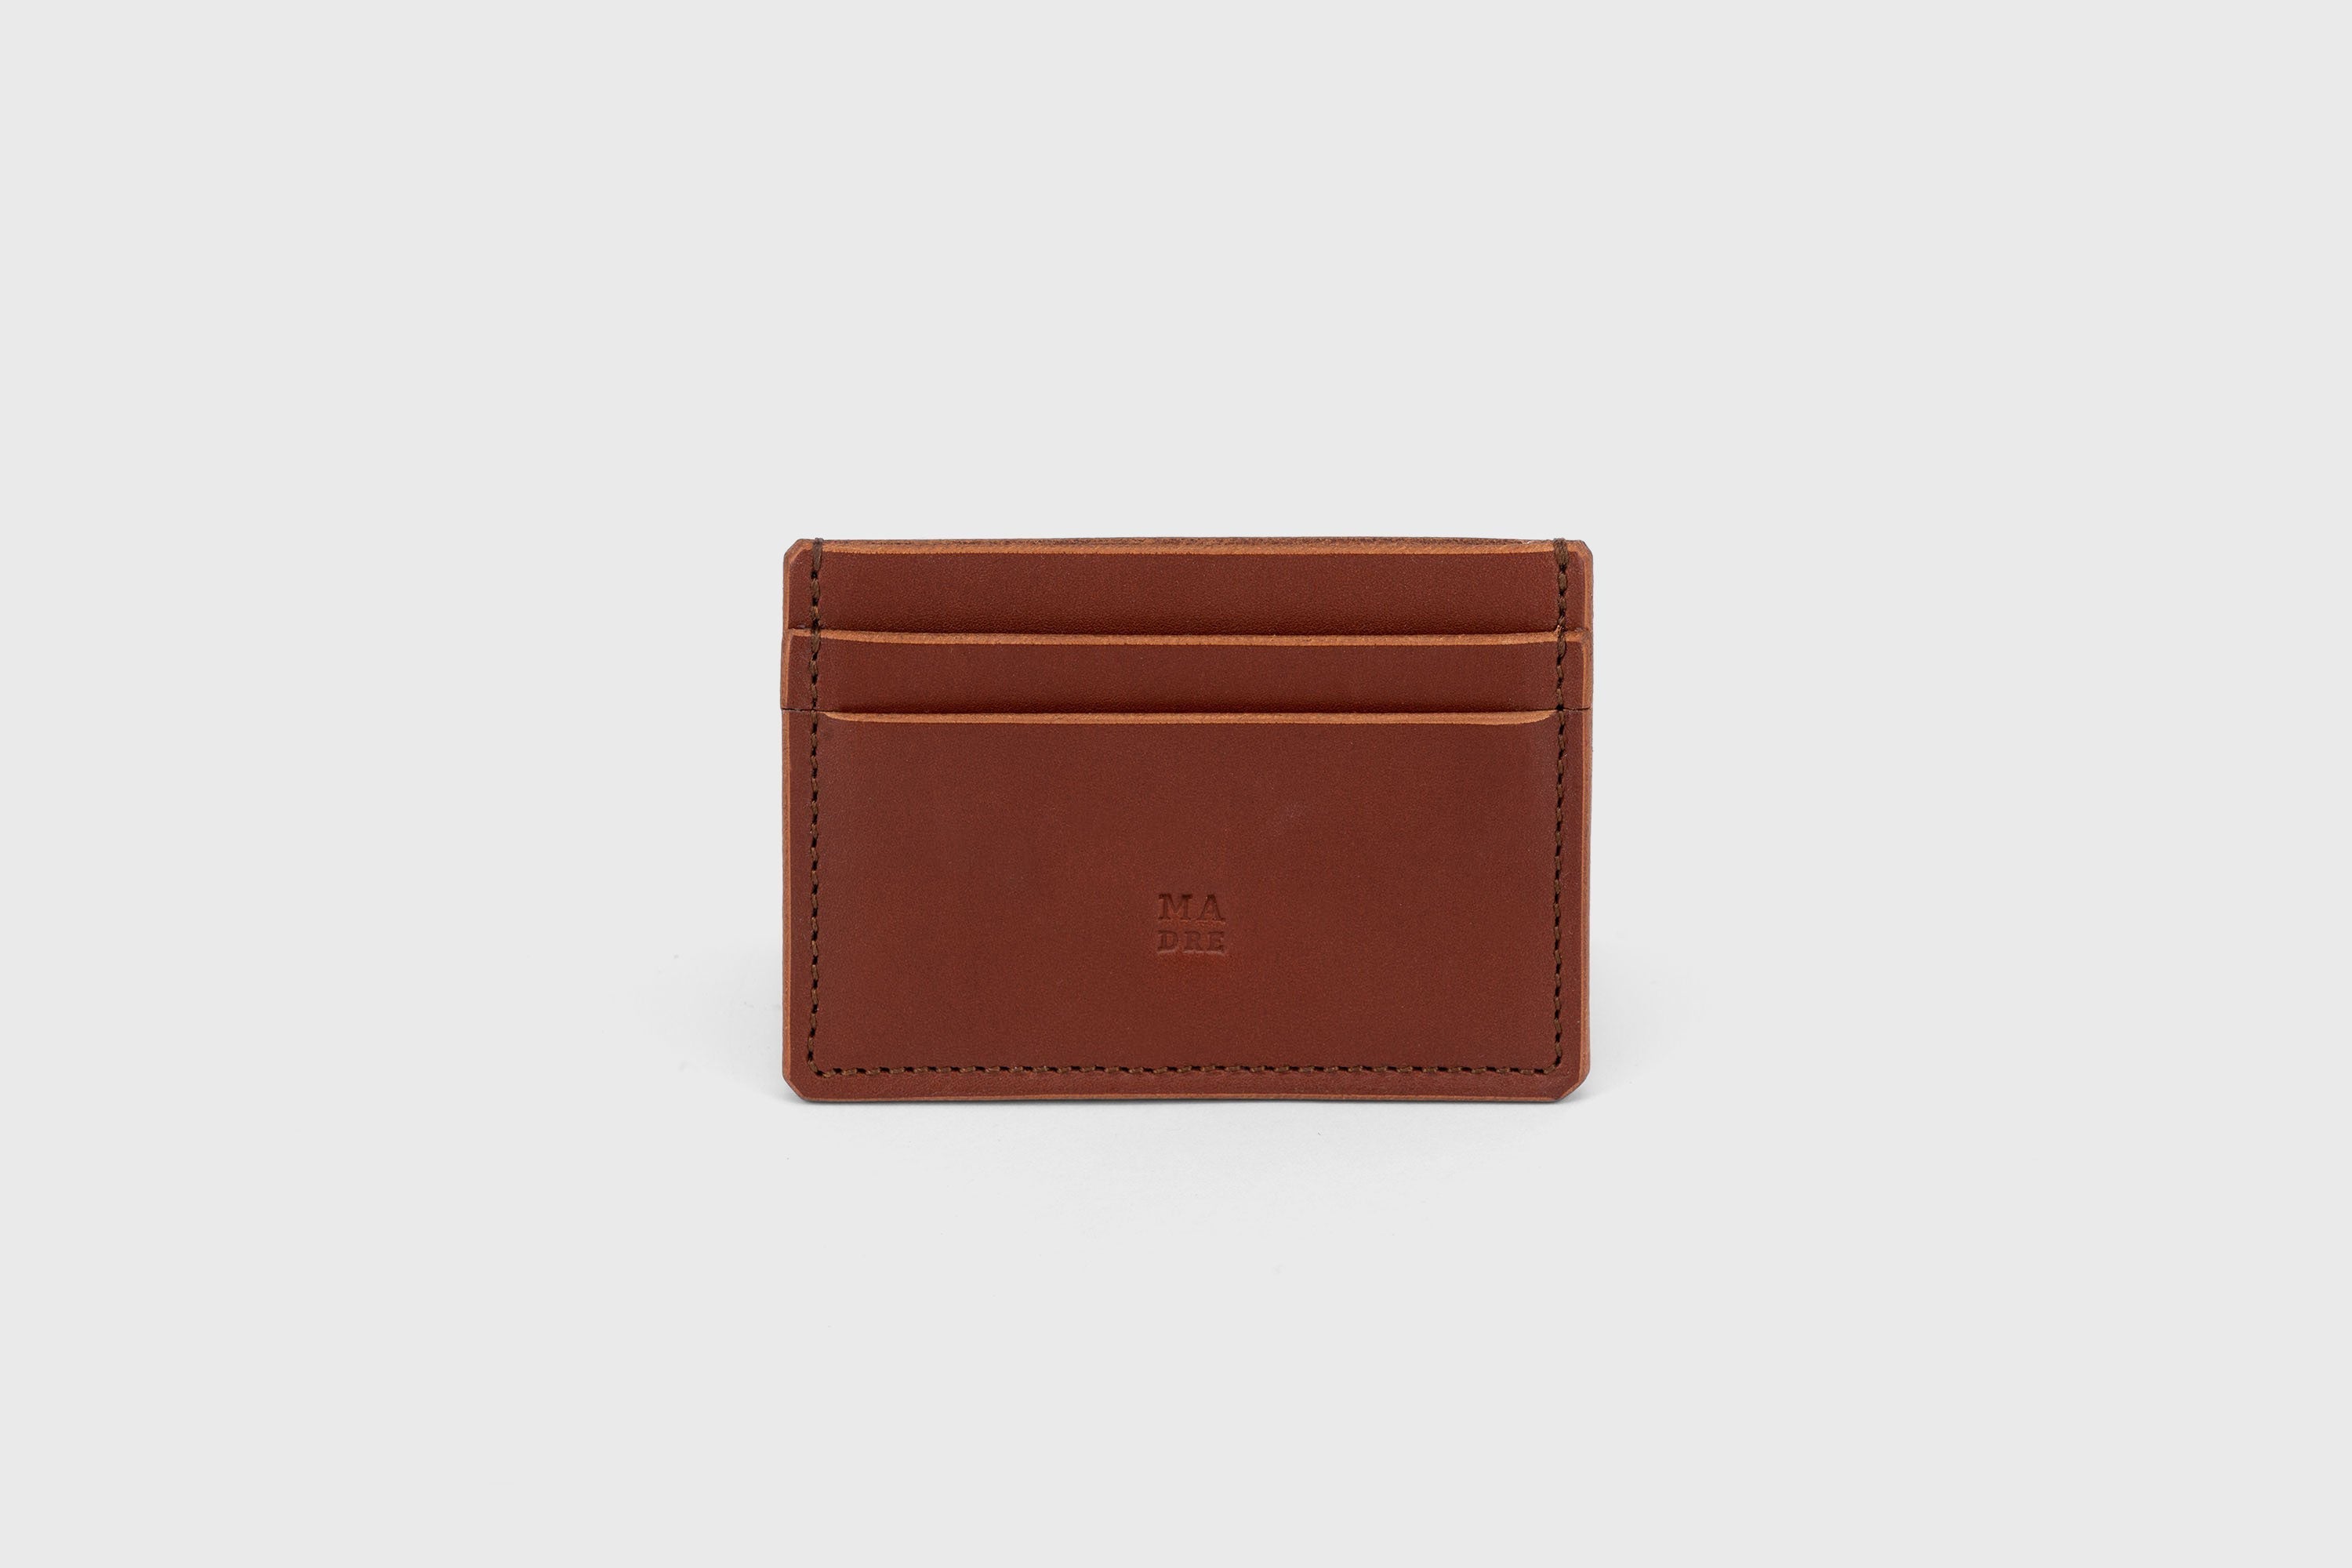 Credit Card Wallet in Dark Brown Leather Vachetta Leather Vegetable Tanned Leather Handmade and Design by Atelier Madre Manuel Dreesmann Barcelona Spain